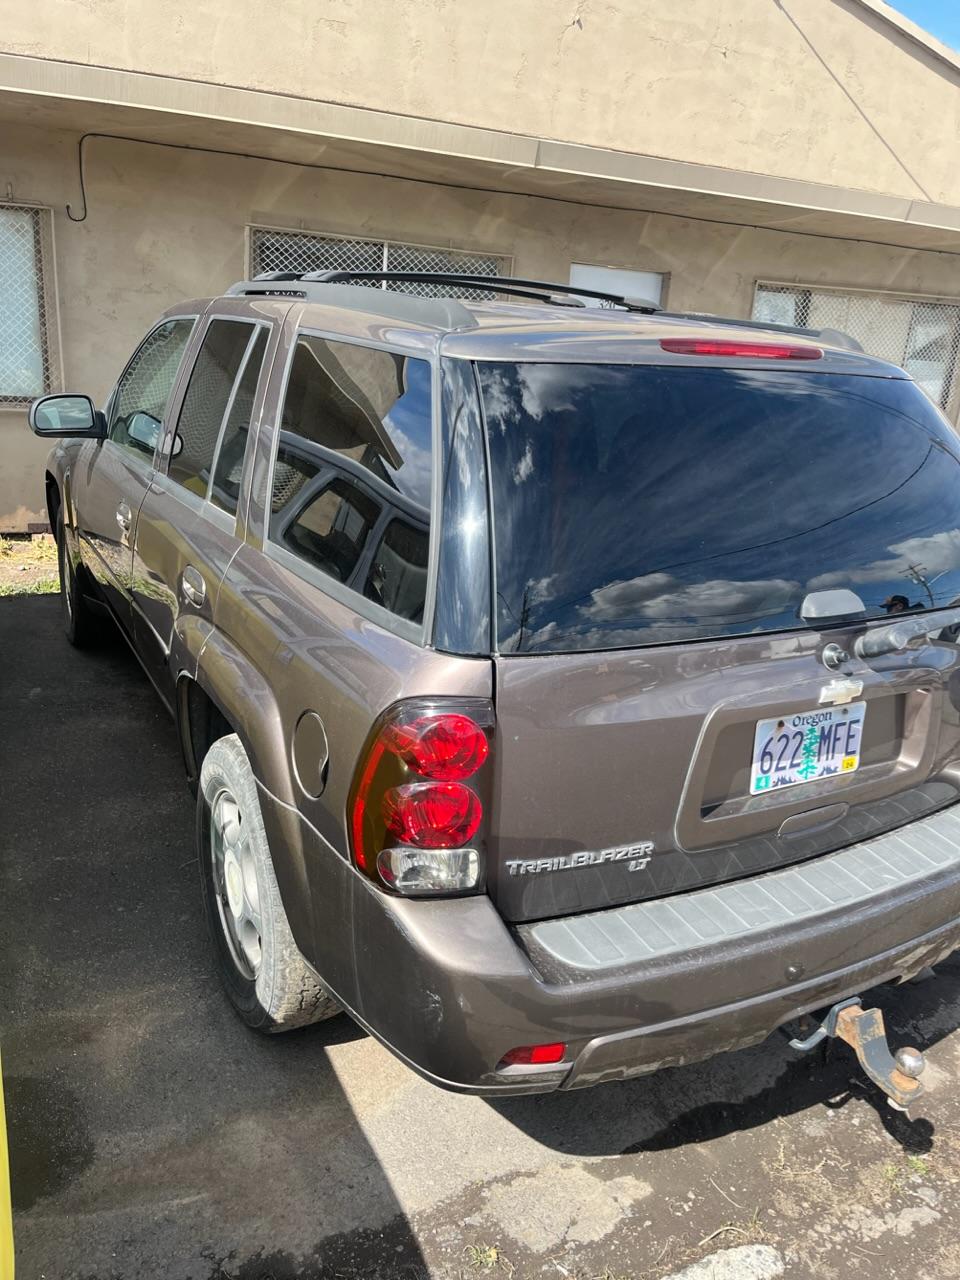 2007 Chevy trailblazer Sells with title